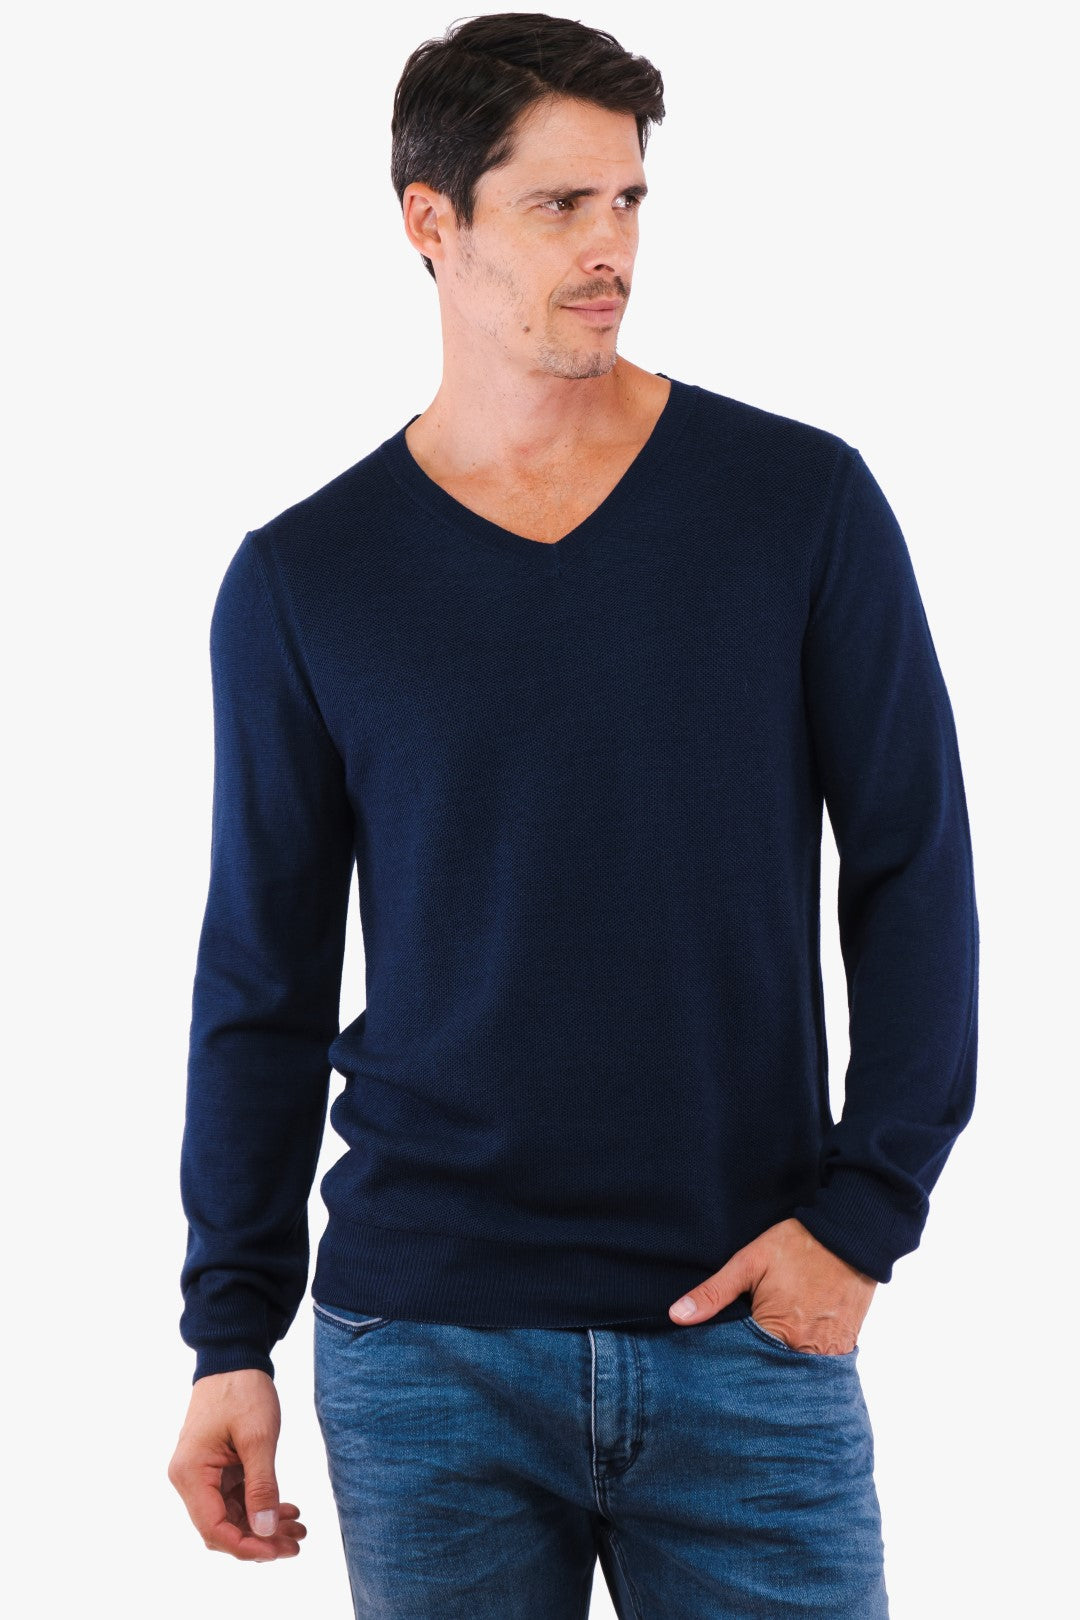 Hörst sweater in Navy color